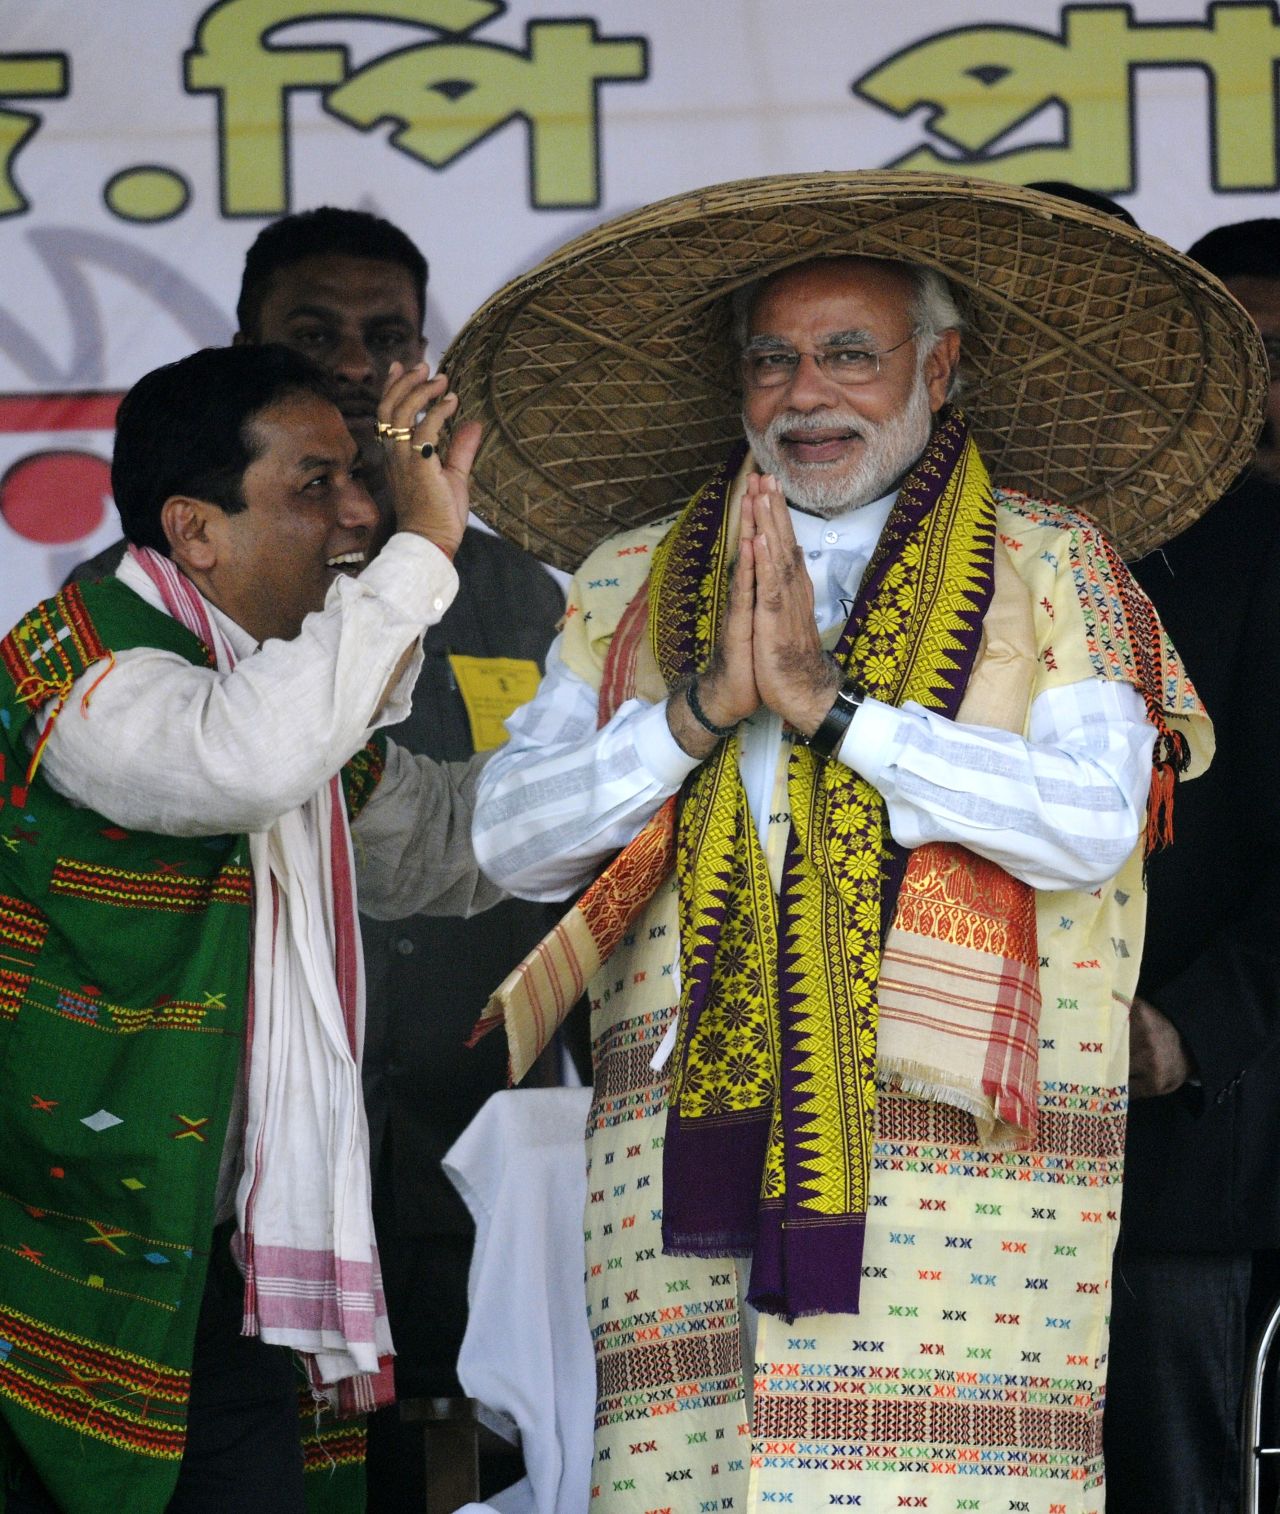 Modi attends a rally in the state of Assam wearing the traditional Japi hat made from bamboo. The Japi is usually worn by Assamese farmers and cowherds and is also a ceremonial item.